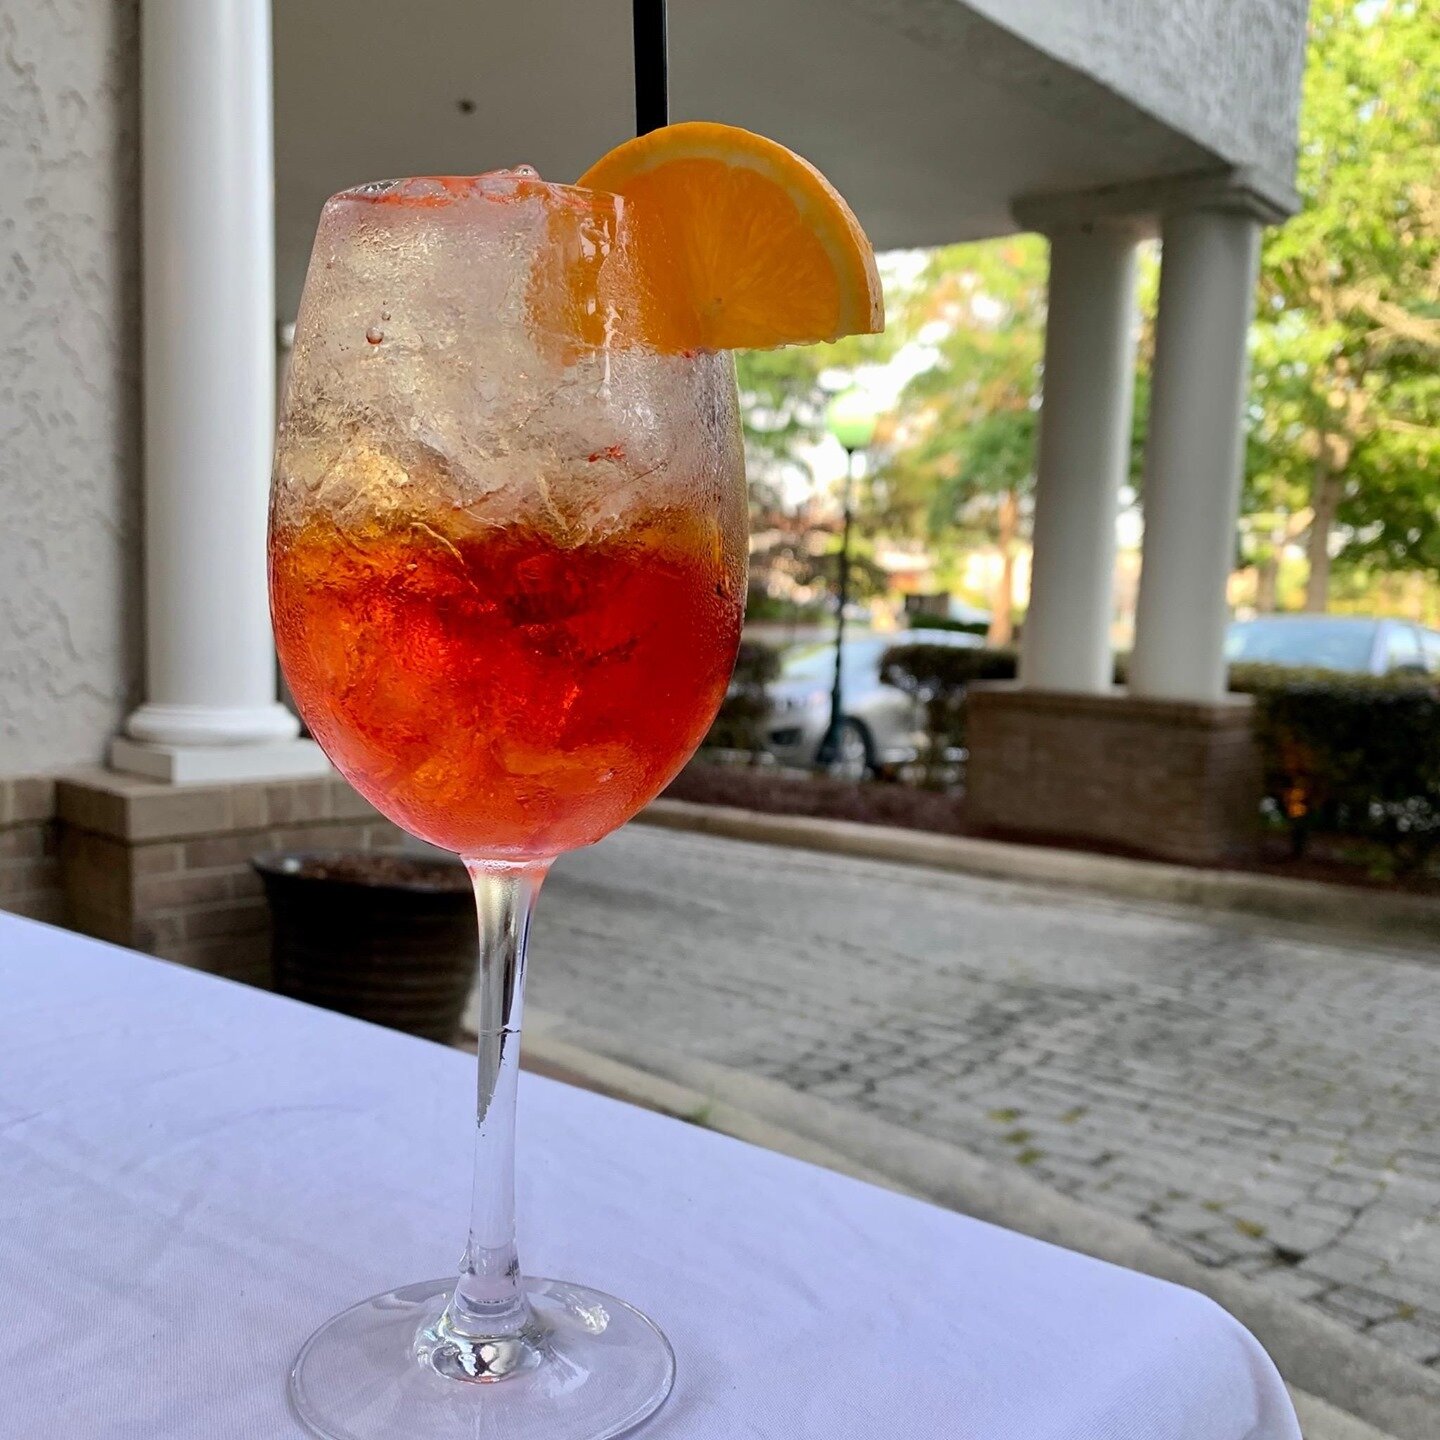 Afternoons call for an aperitif! In true Italian fashion, enjoy a refreshing drink before your dinner.⠀
.⠀
.⠀
.⠀
 #ilpalionc #thesienahotel #visitchapelhill #visitnc #italian #italiancooking #italianfood #nceats #chapelhill #cheflife #localfood #trif